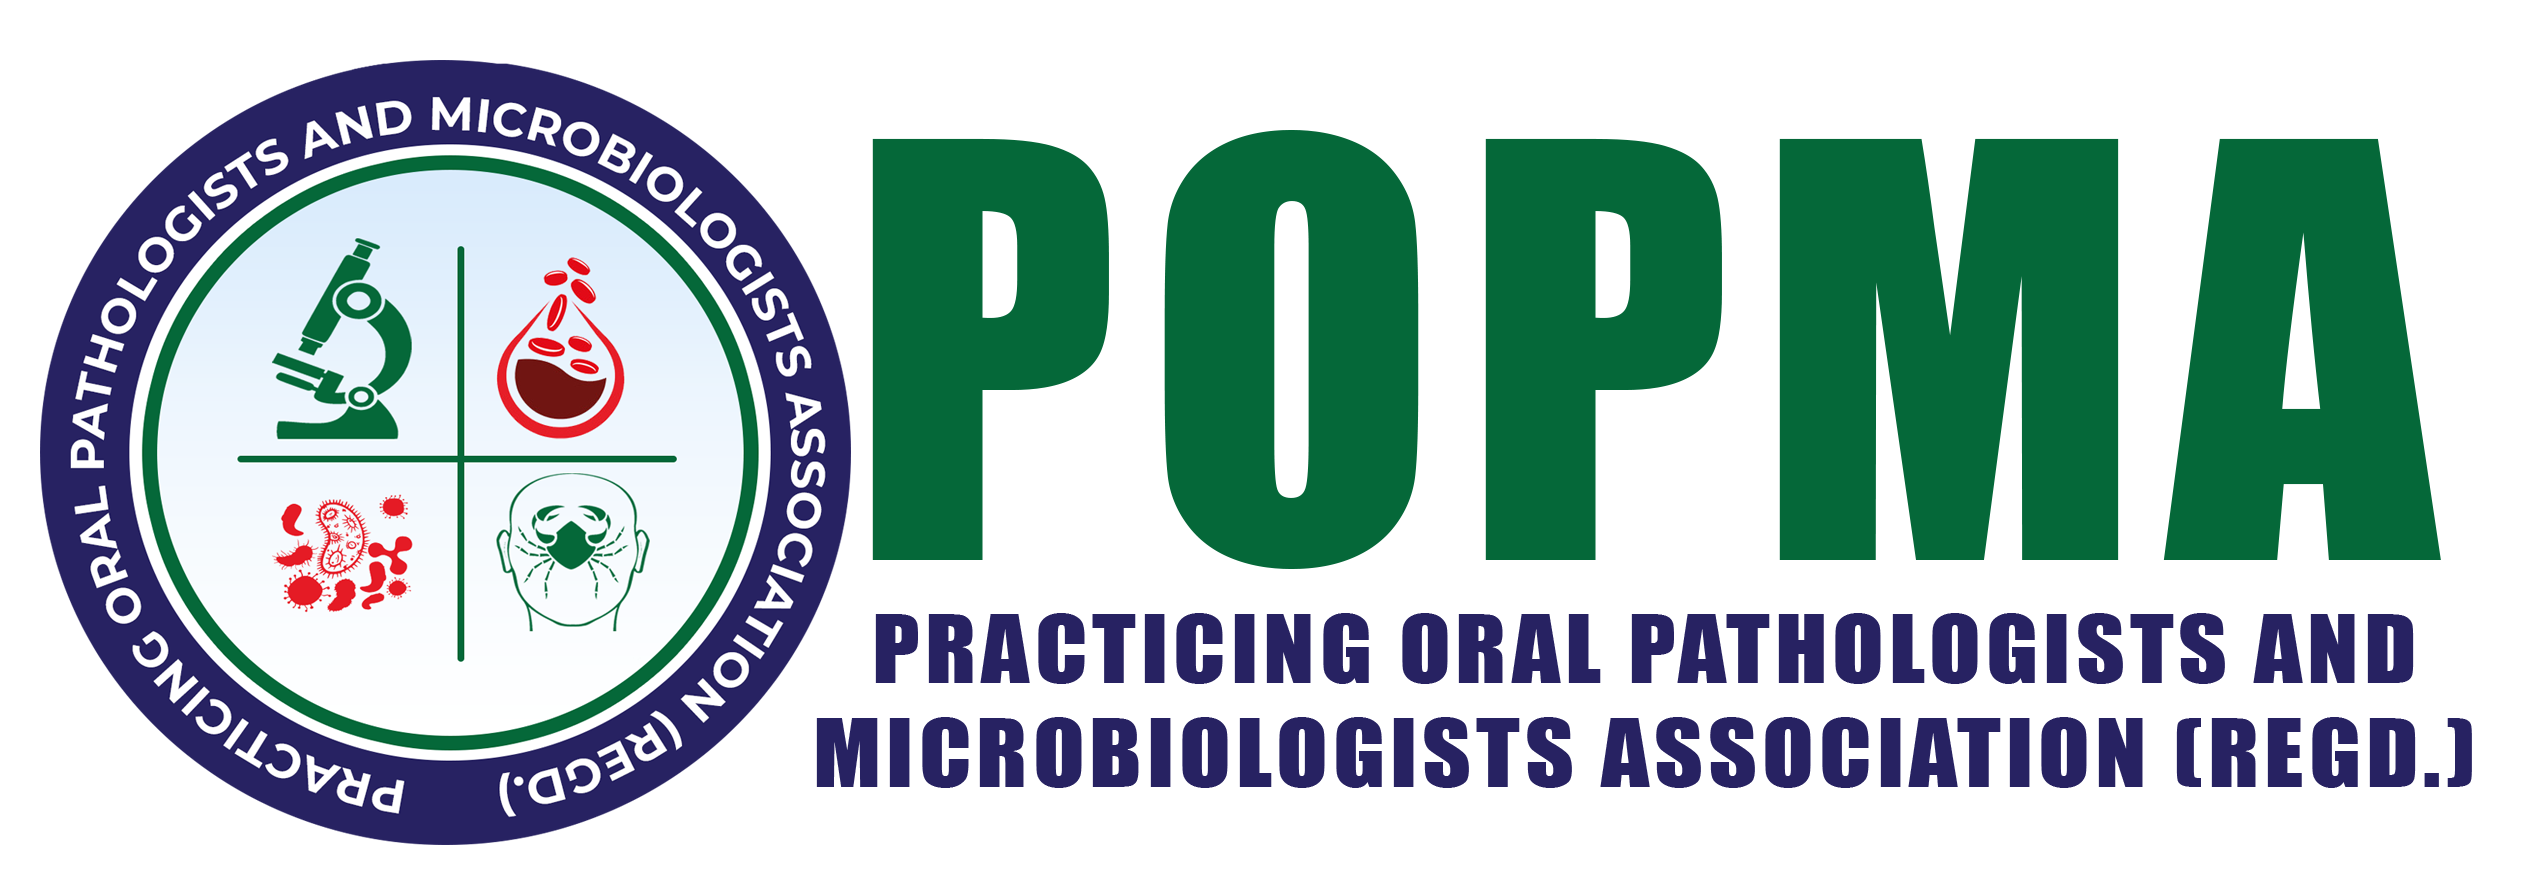 PRACTICING ORAL PATHOLOGISTS AND MICROBIOLOGISTS ASSOCIATION (REGD.) 